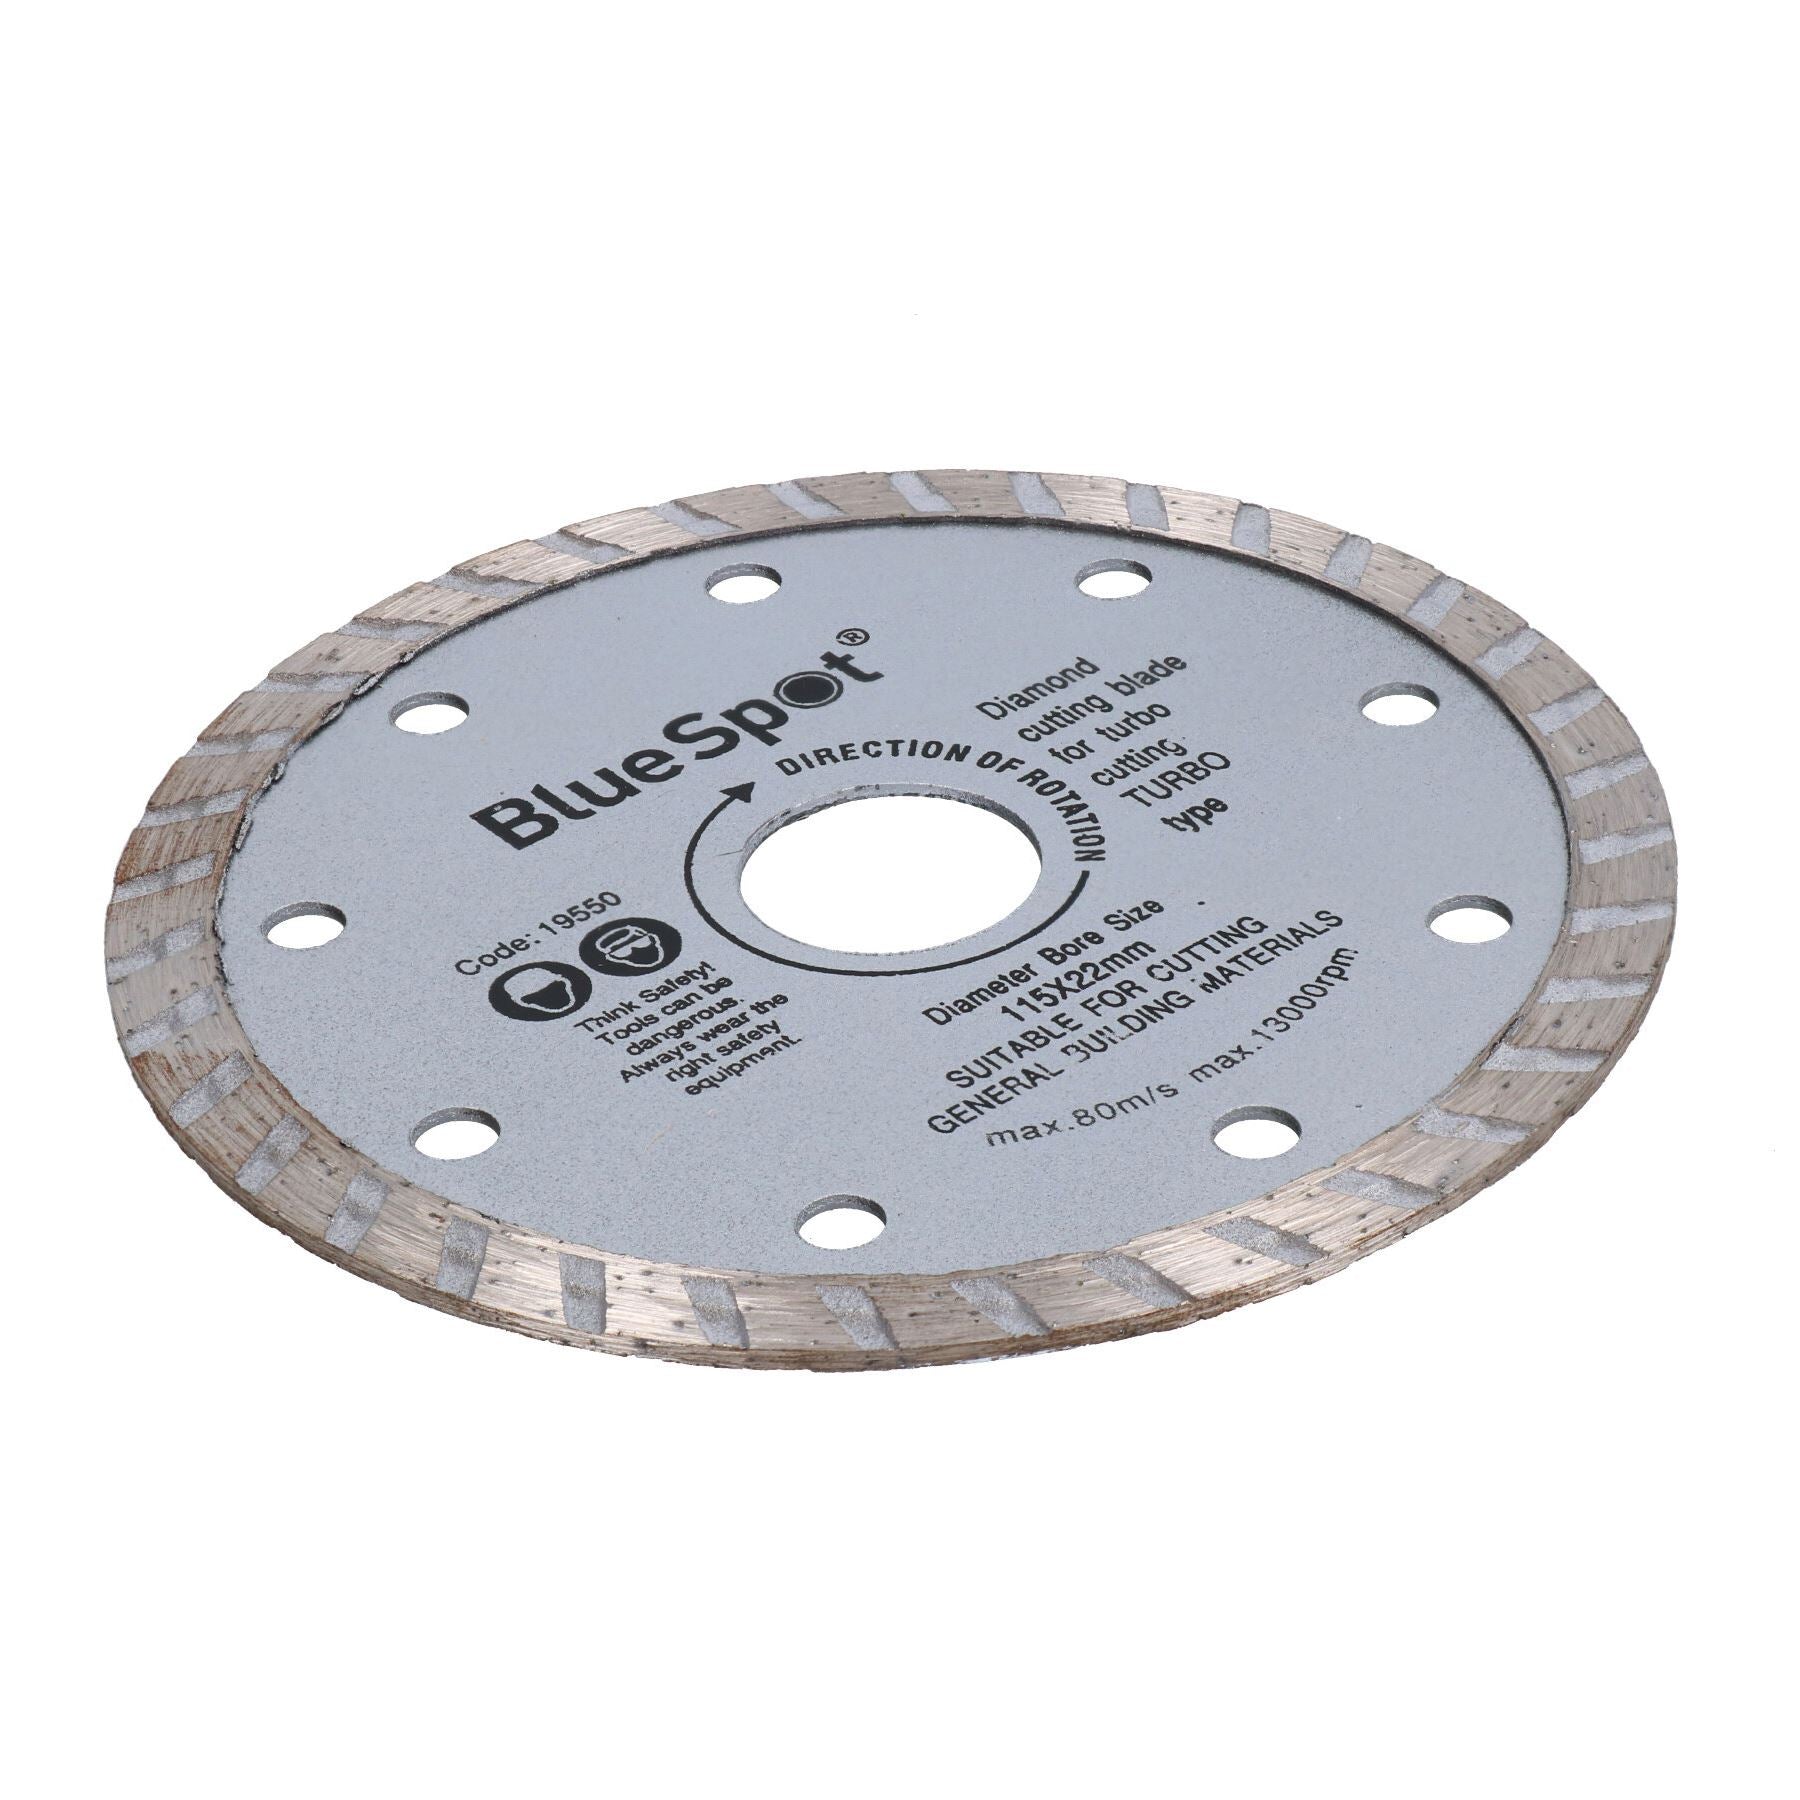 115mm 4.5” 1.2mm Turbo Diamond Ceramic Tile Cutting Disc for Angle Grinders